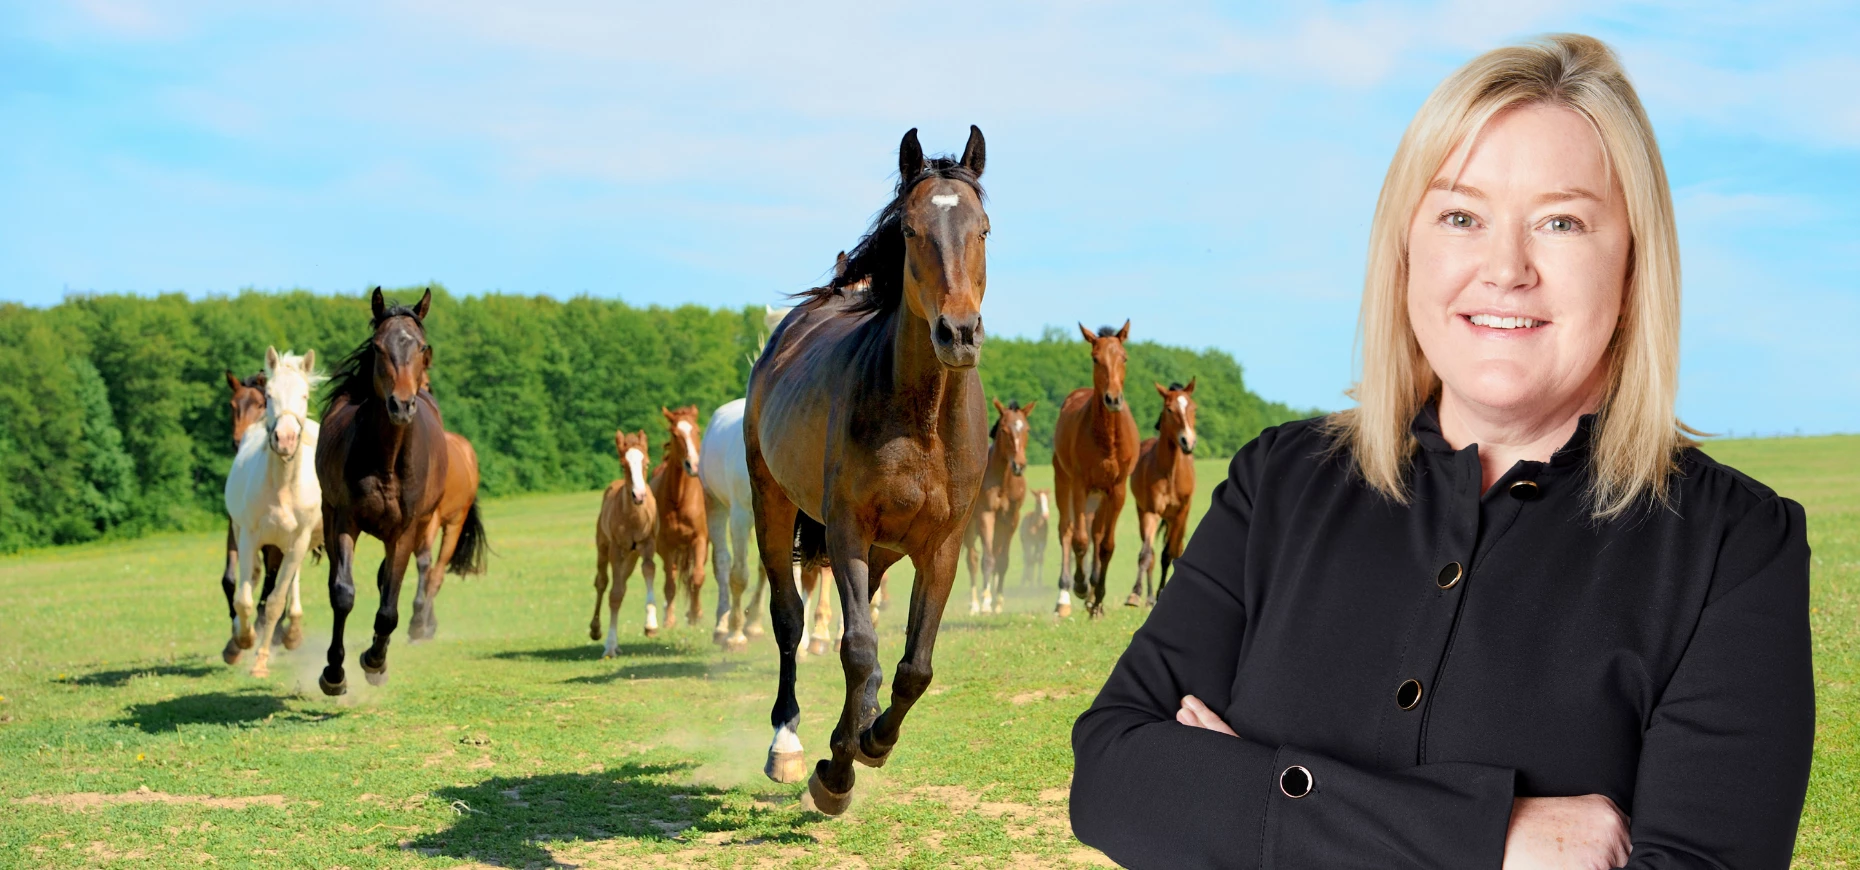 Liz Hopper, Managing Director at Harry Hall, pictured against a group of running horses.